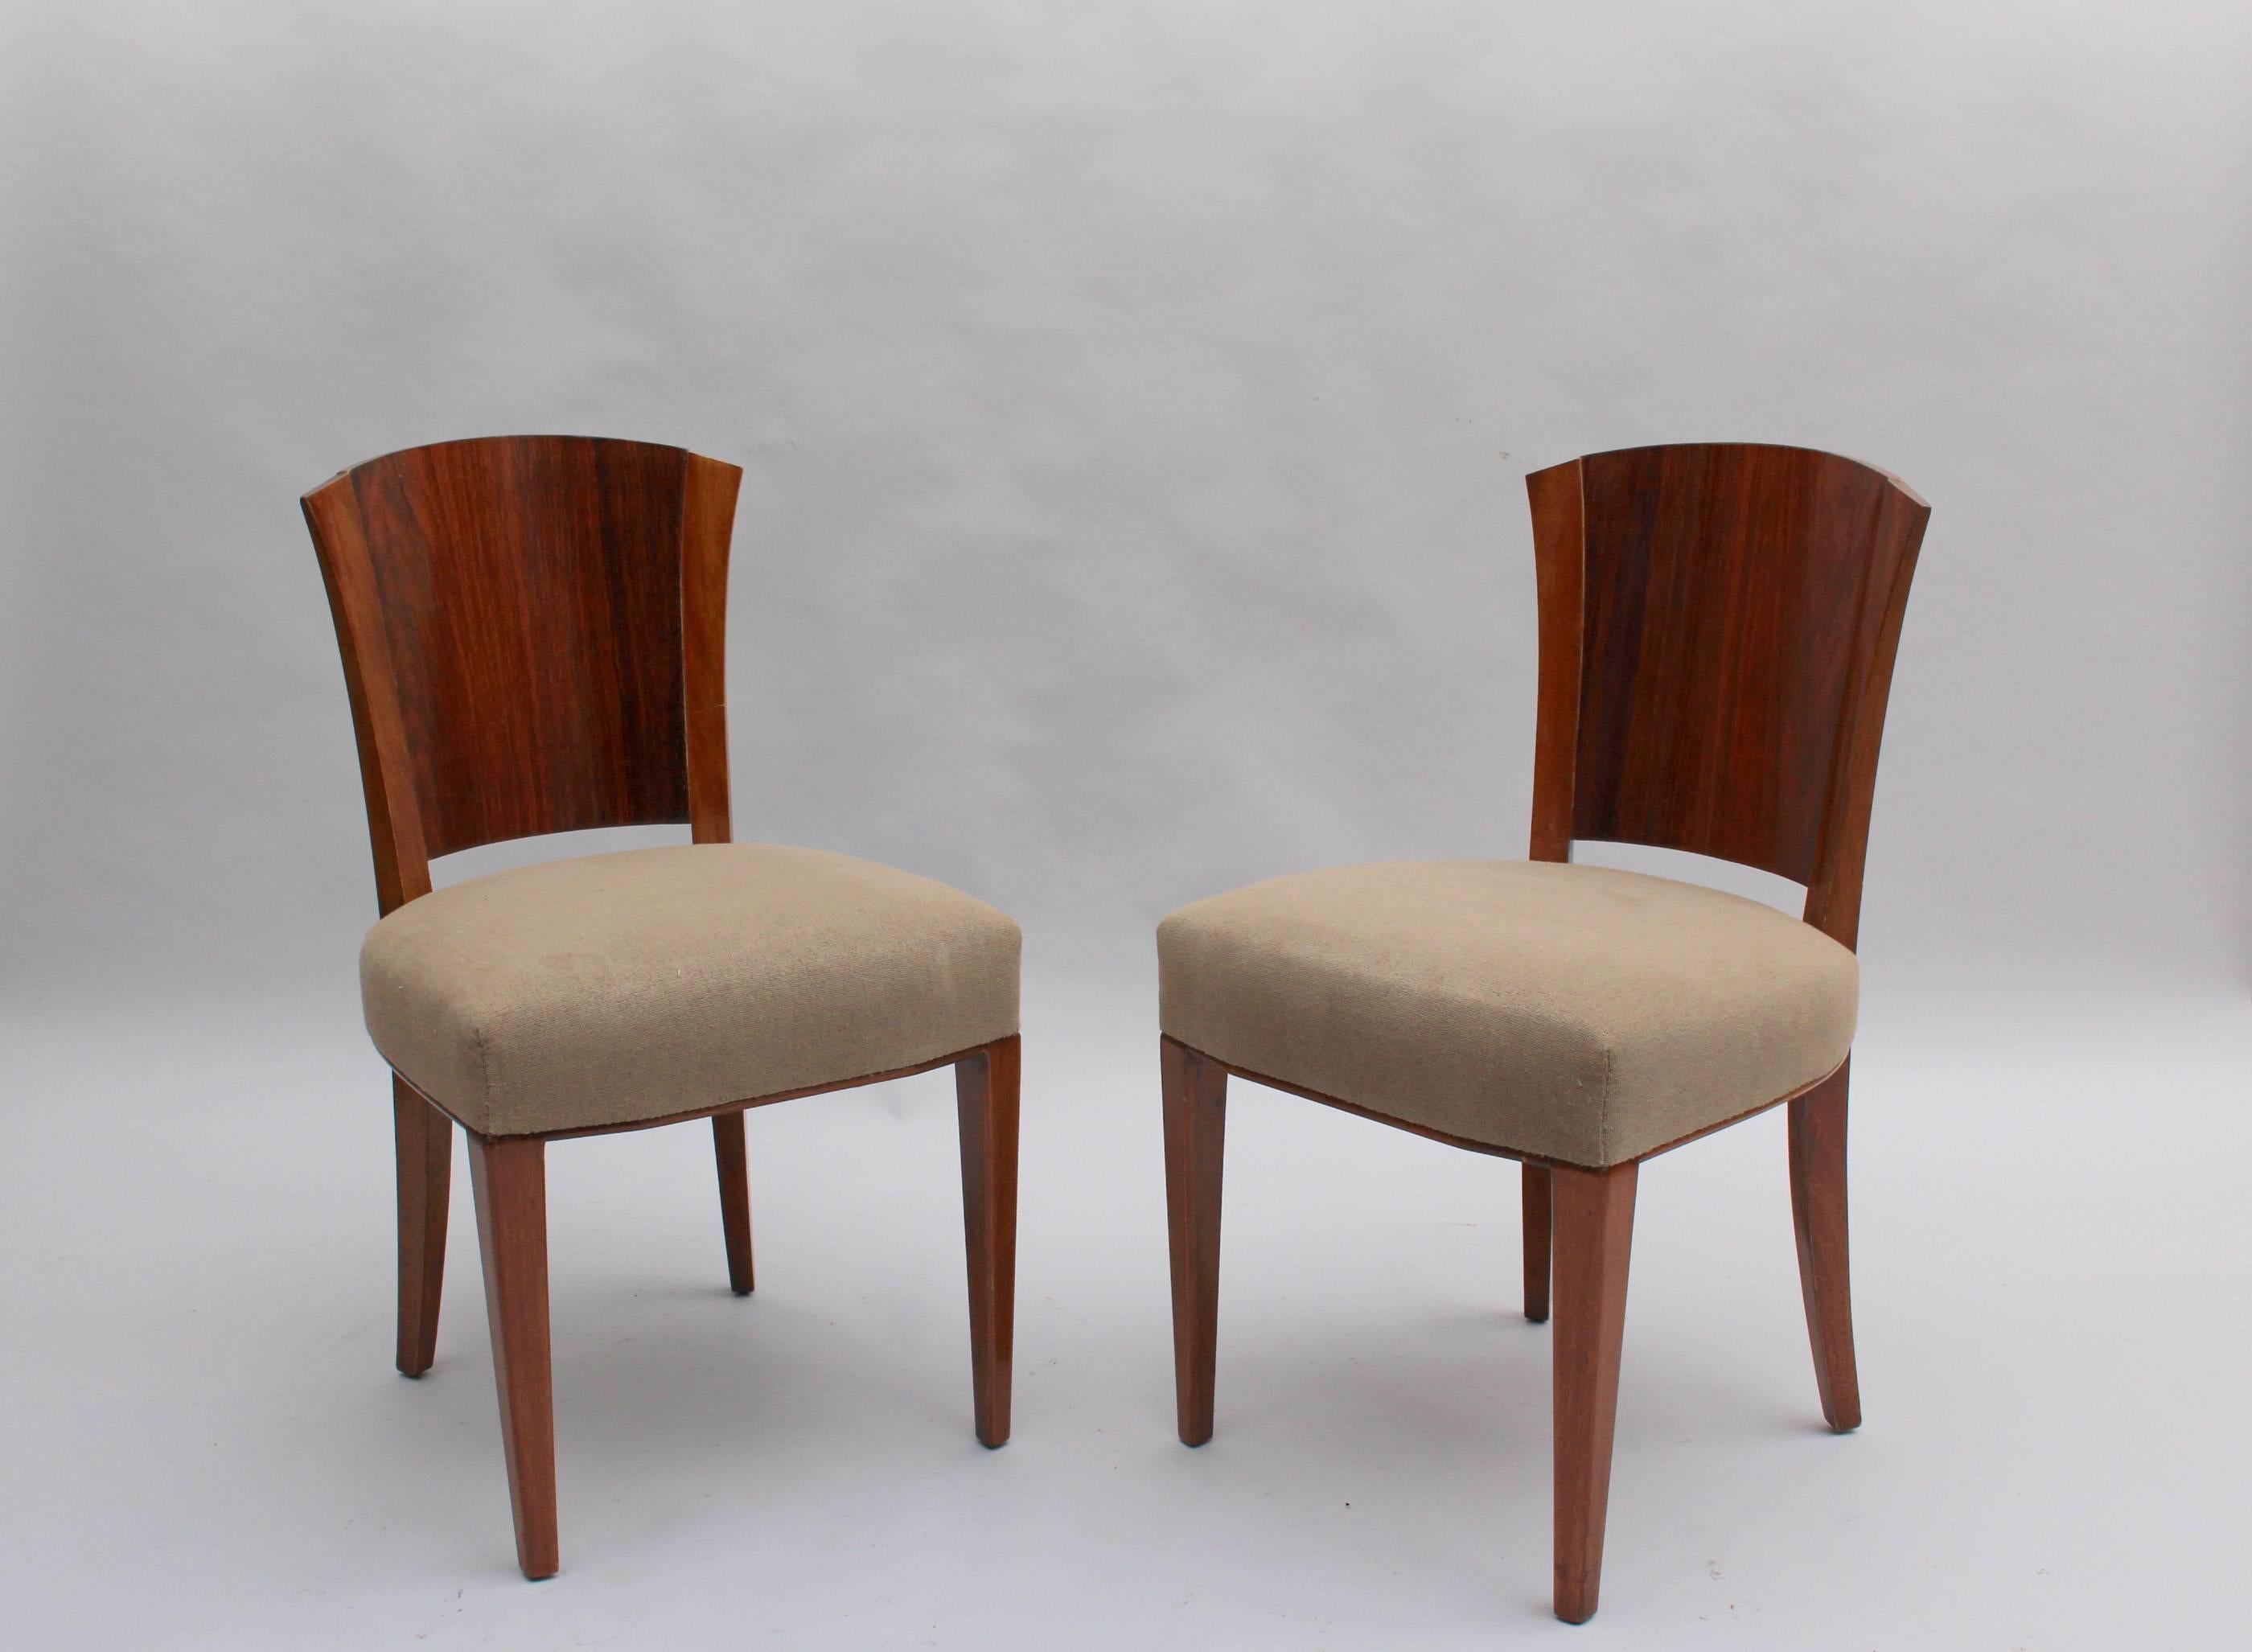 Maison Dominique (founded in 1922 by André Domin and Marcel Genevriere):

A set of four fine French Art Deco side/dining chairs by Dominique, with a solid mahogany frame, a rosewood veneered back and upholstered seats .

Documented page 90 of the